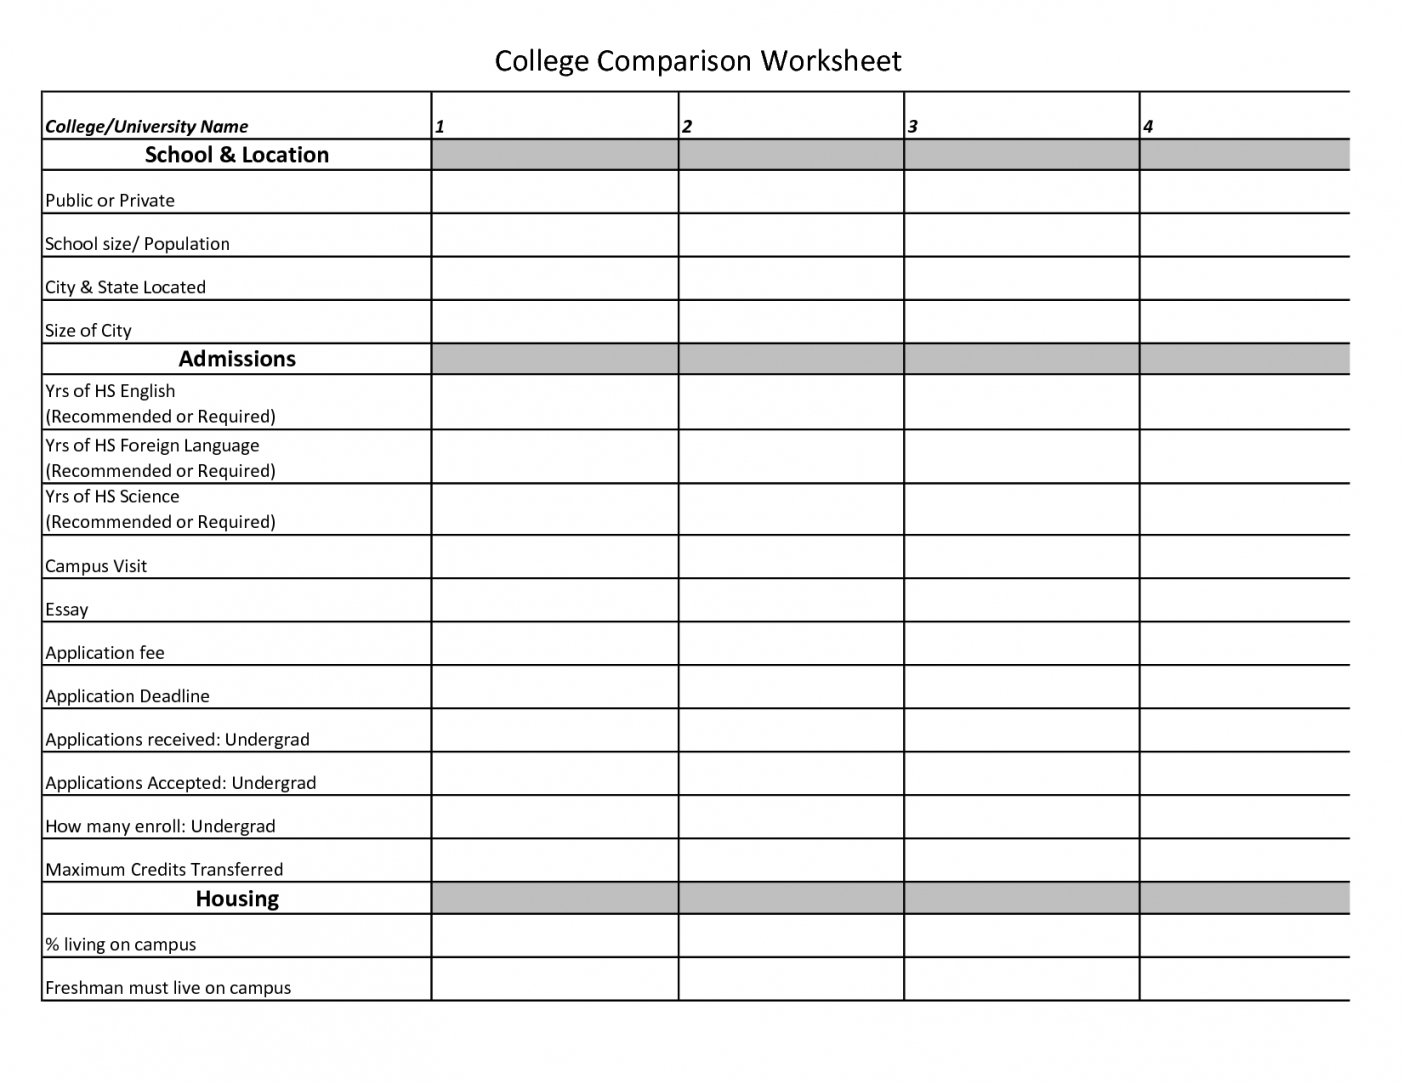 College Application Spreadsheet Checklist With College Application Spreadsheet Template Review And Specs Scarfoo